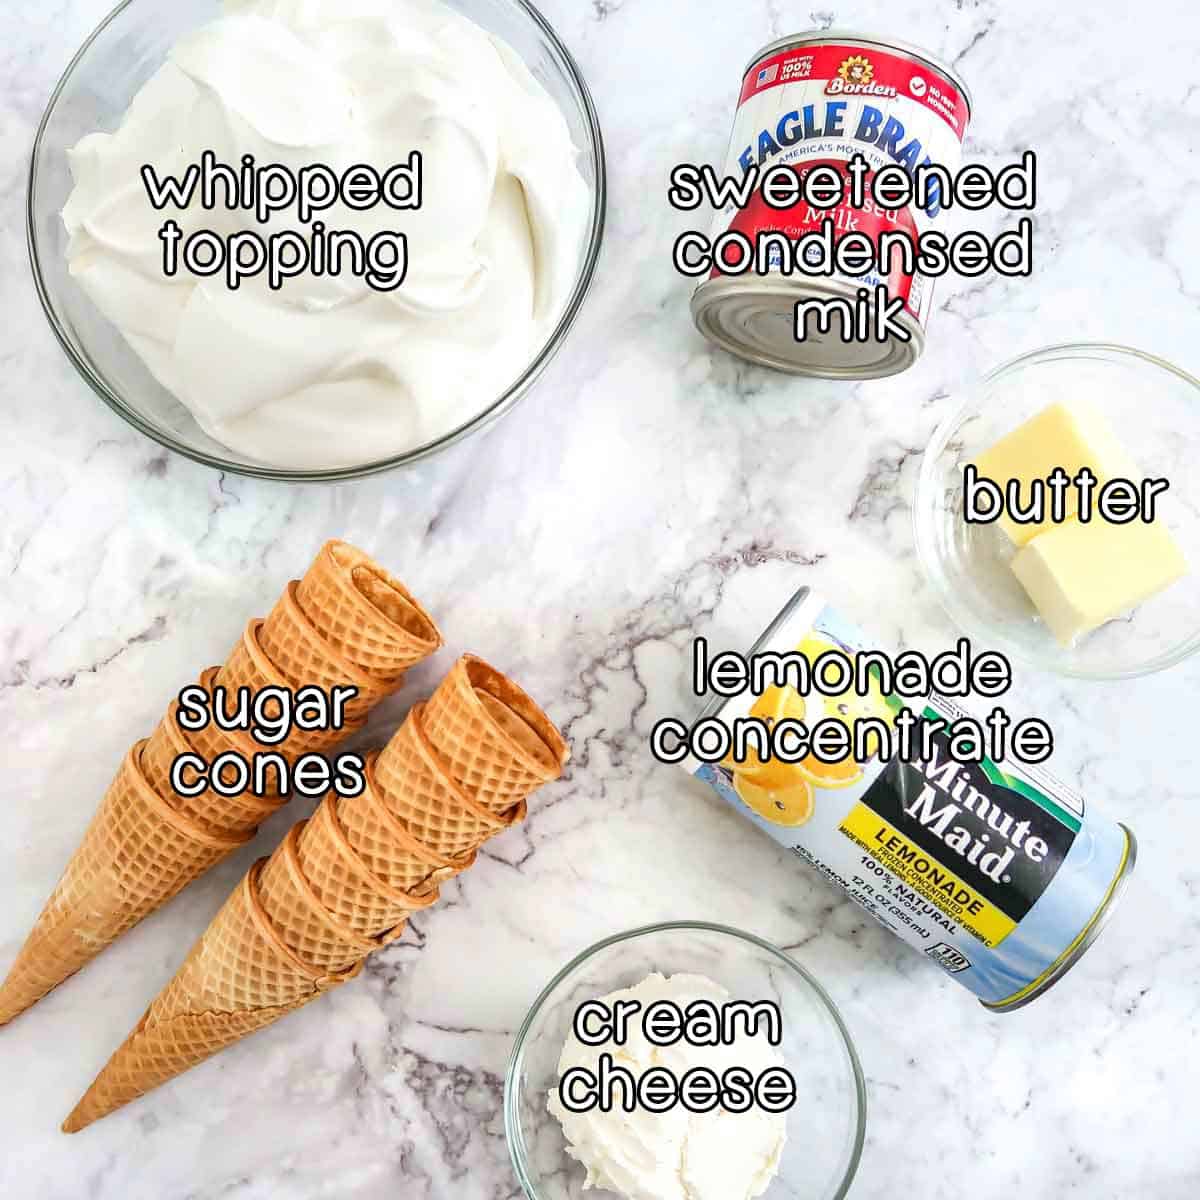 Overhead shot of ingredients- whipped topping, sweetened condensed milk, butter, lemonade concentrate, cream cheese, and sugar cones.